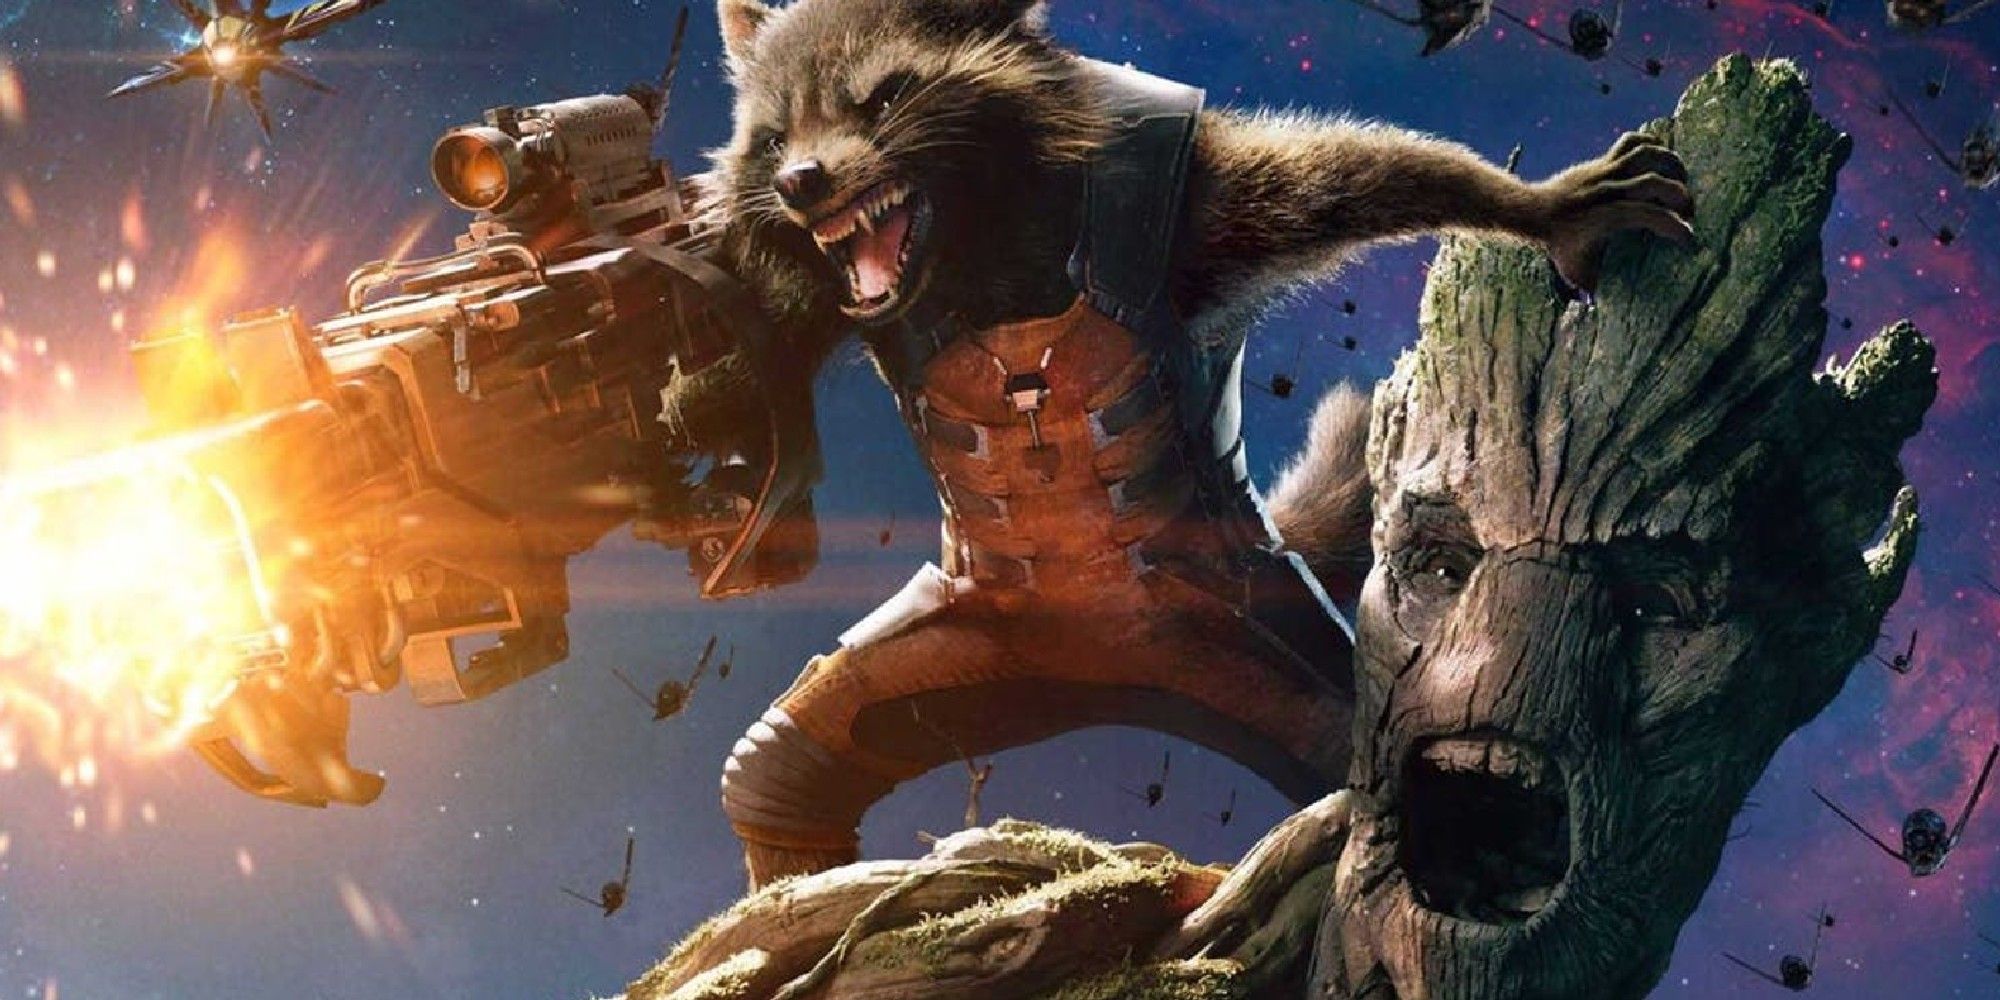 Rocket rides on Groots Shoulders in Guardians of the Galaxy